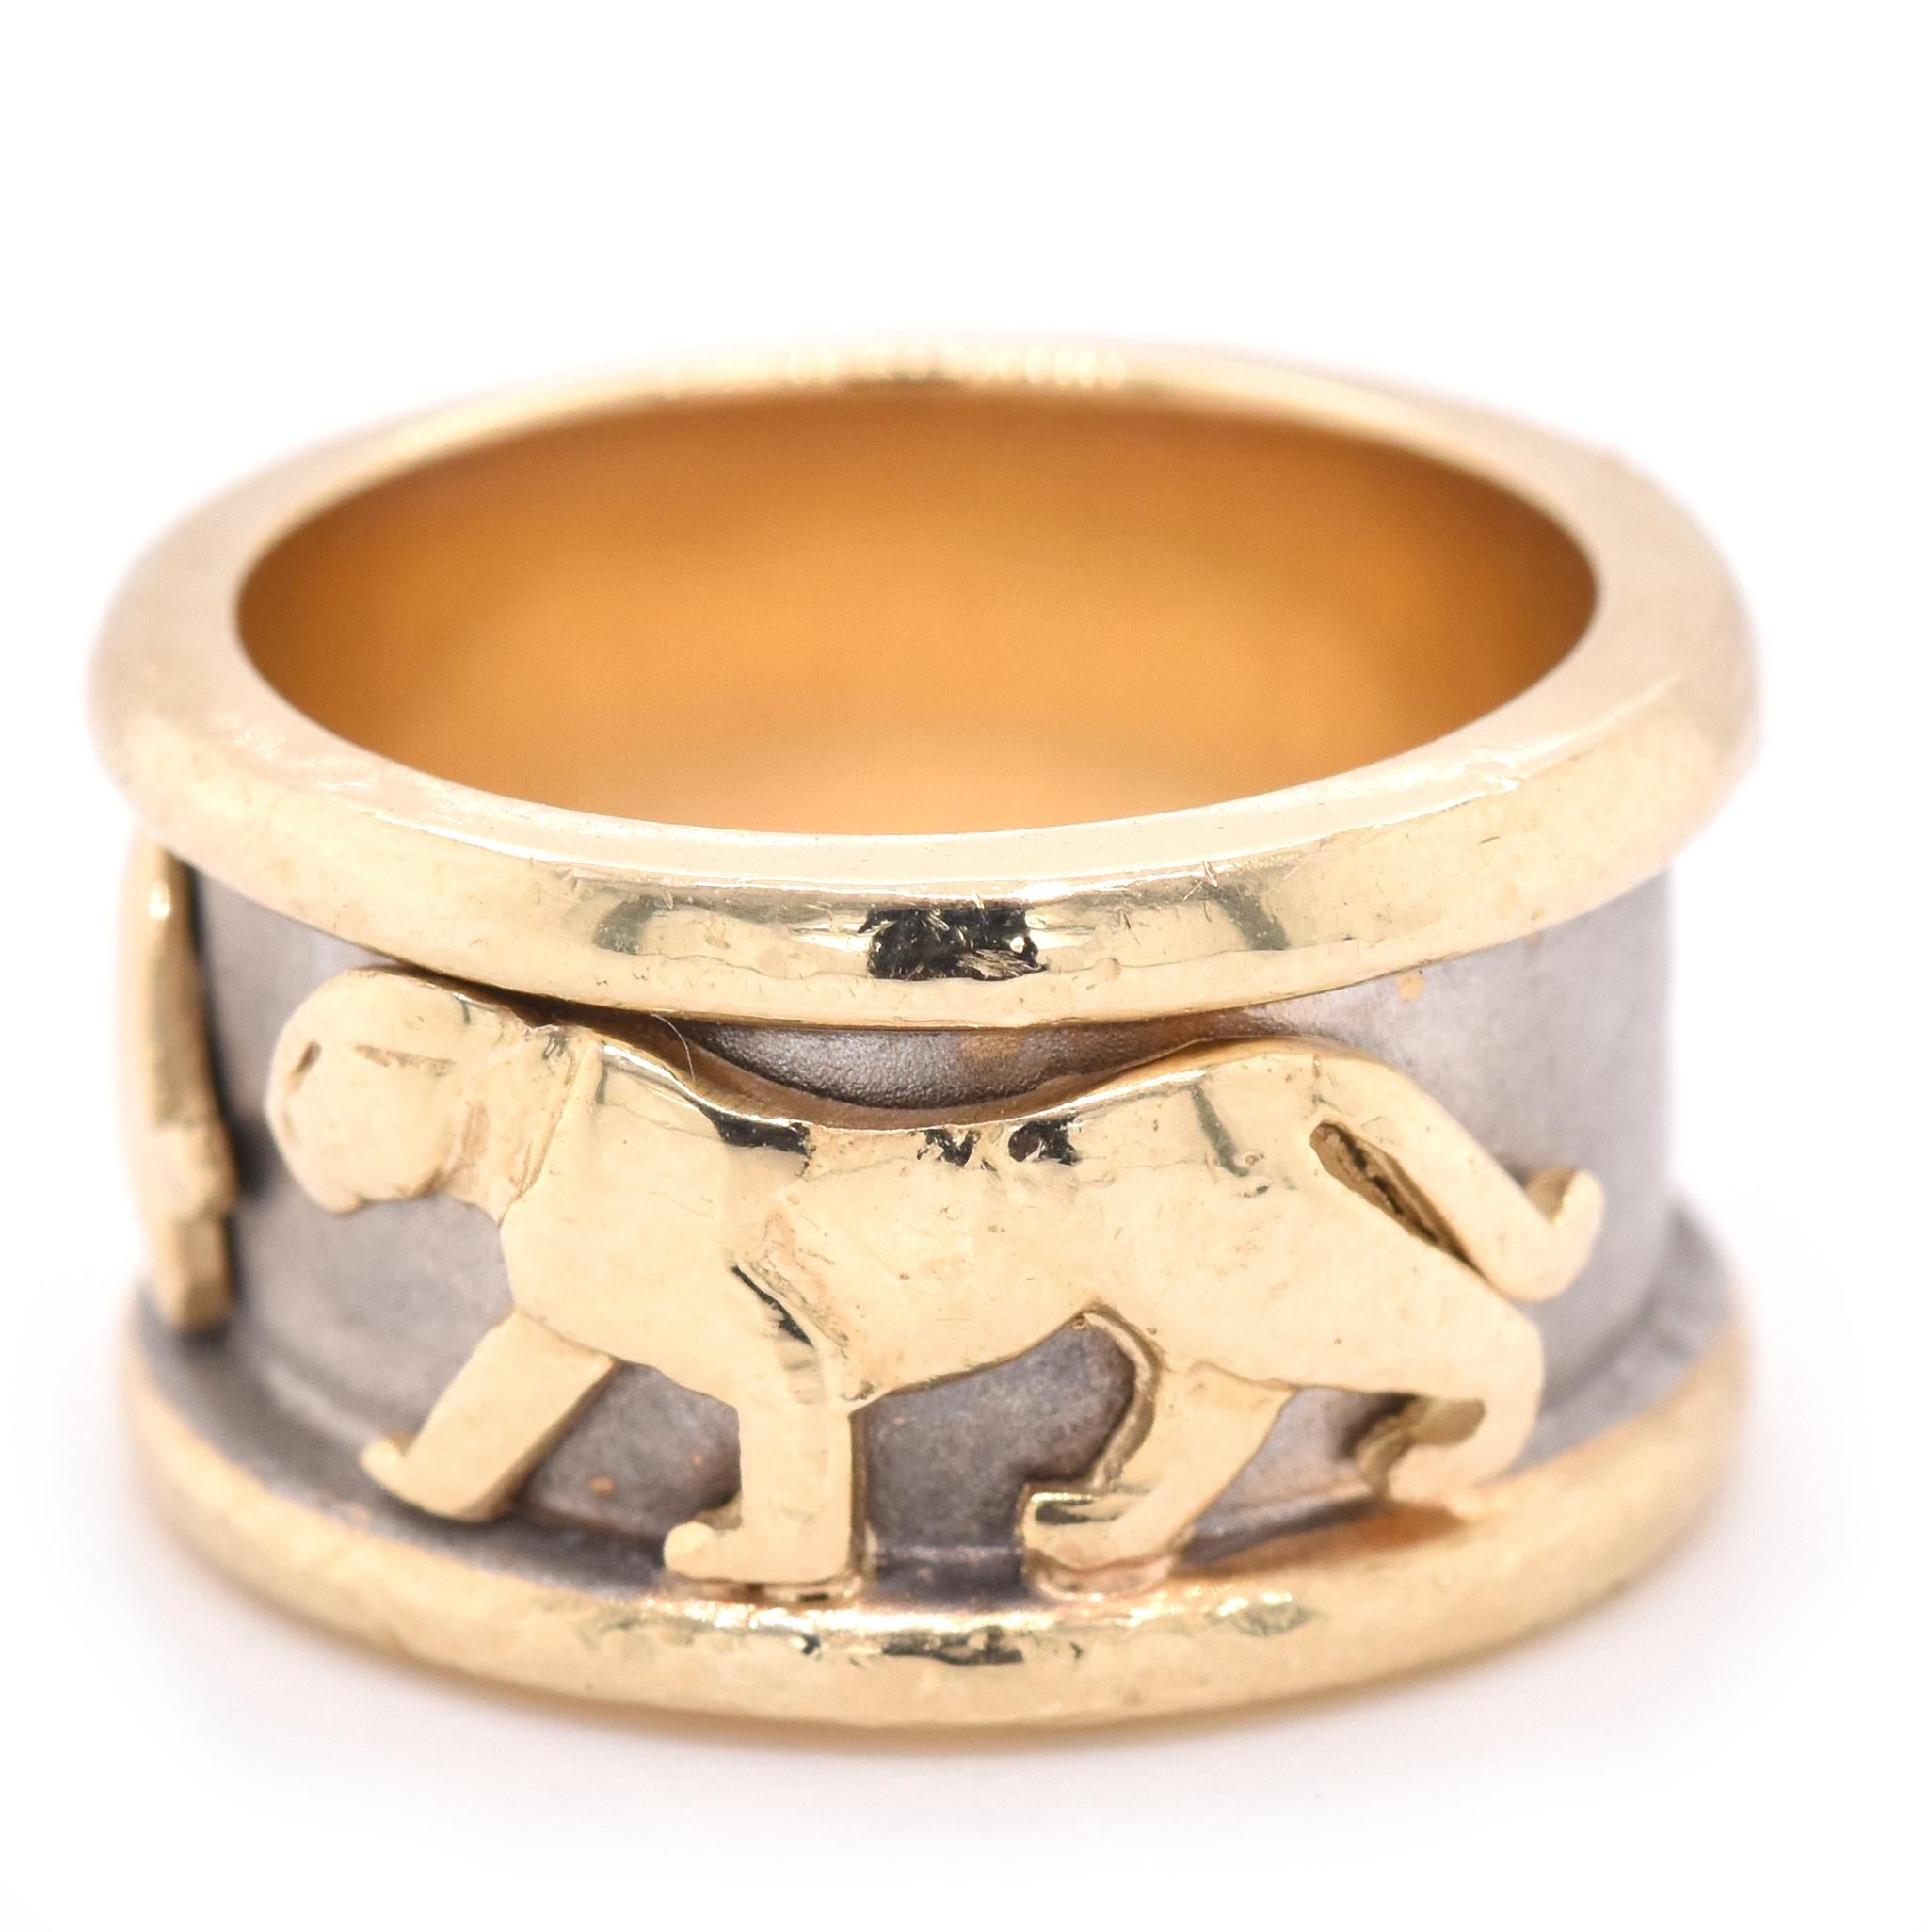 Material: 14k yellow gold
Ring Size: 5 (please allow up to two additional business days for sizing requests)
Dimensions: ring measures 11.05mm in width
Weight: 11.2 grams